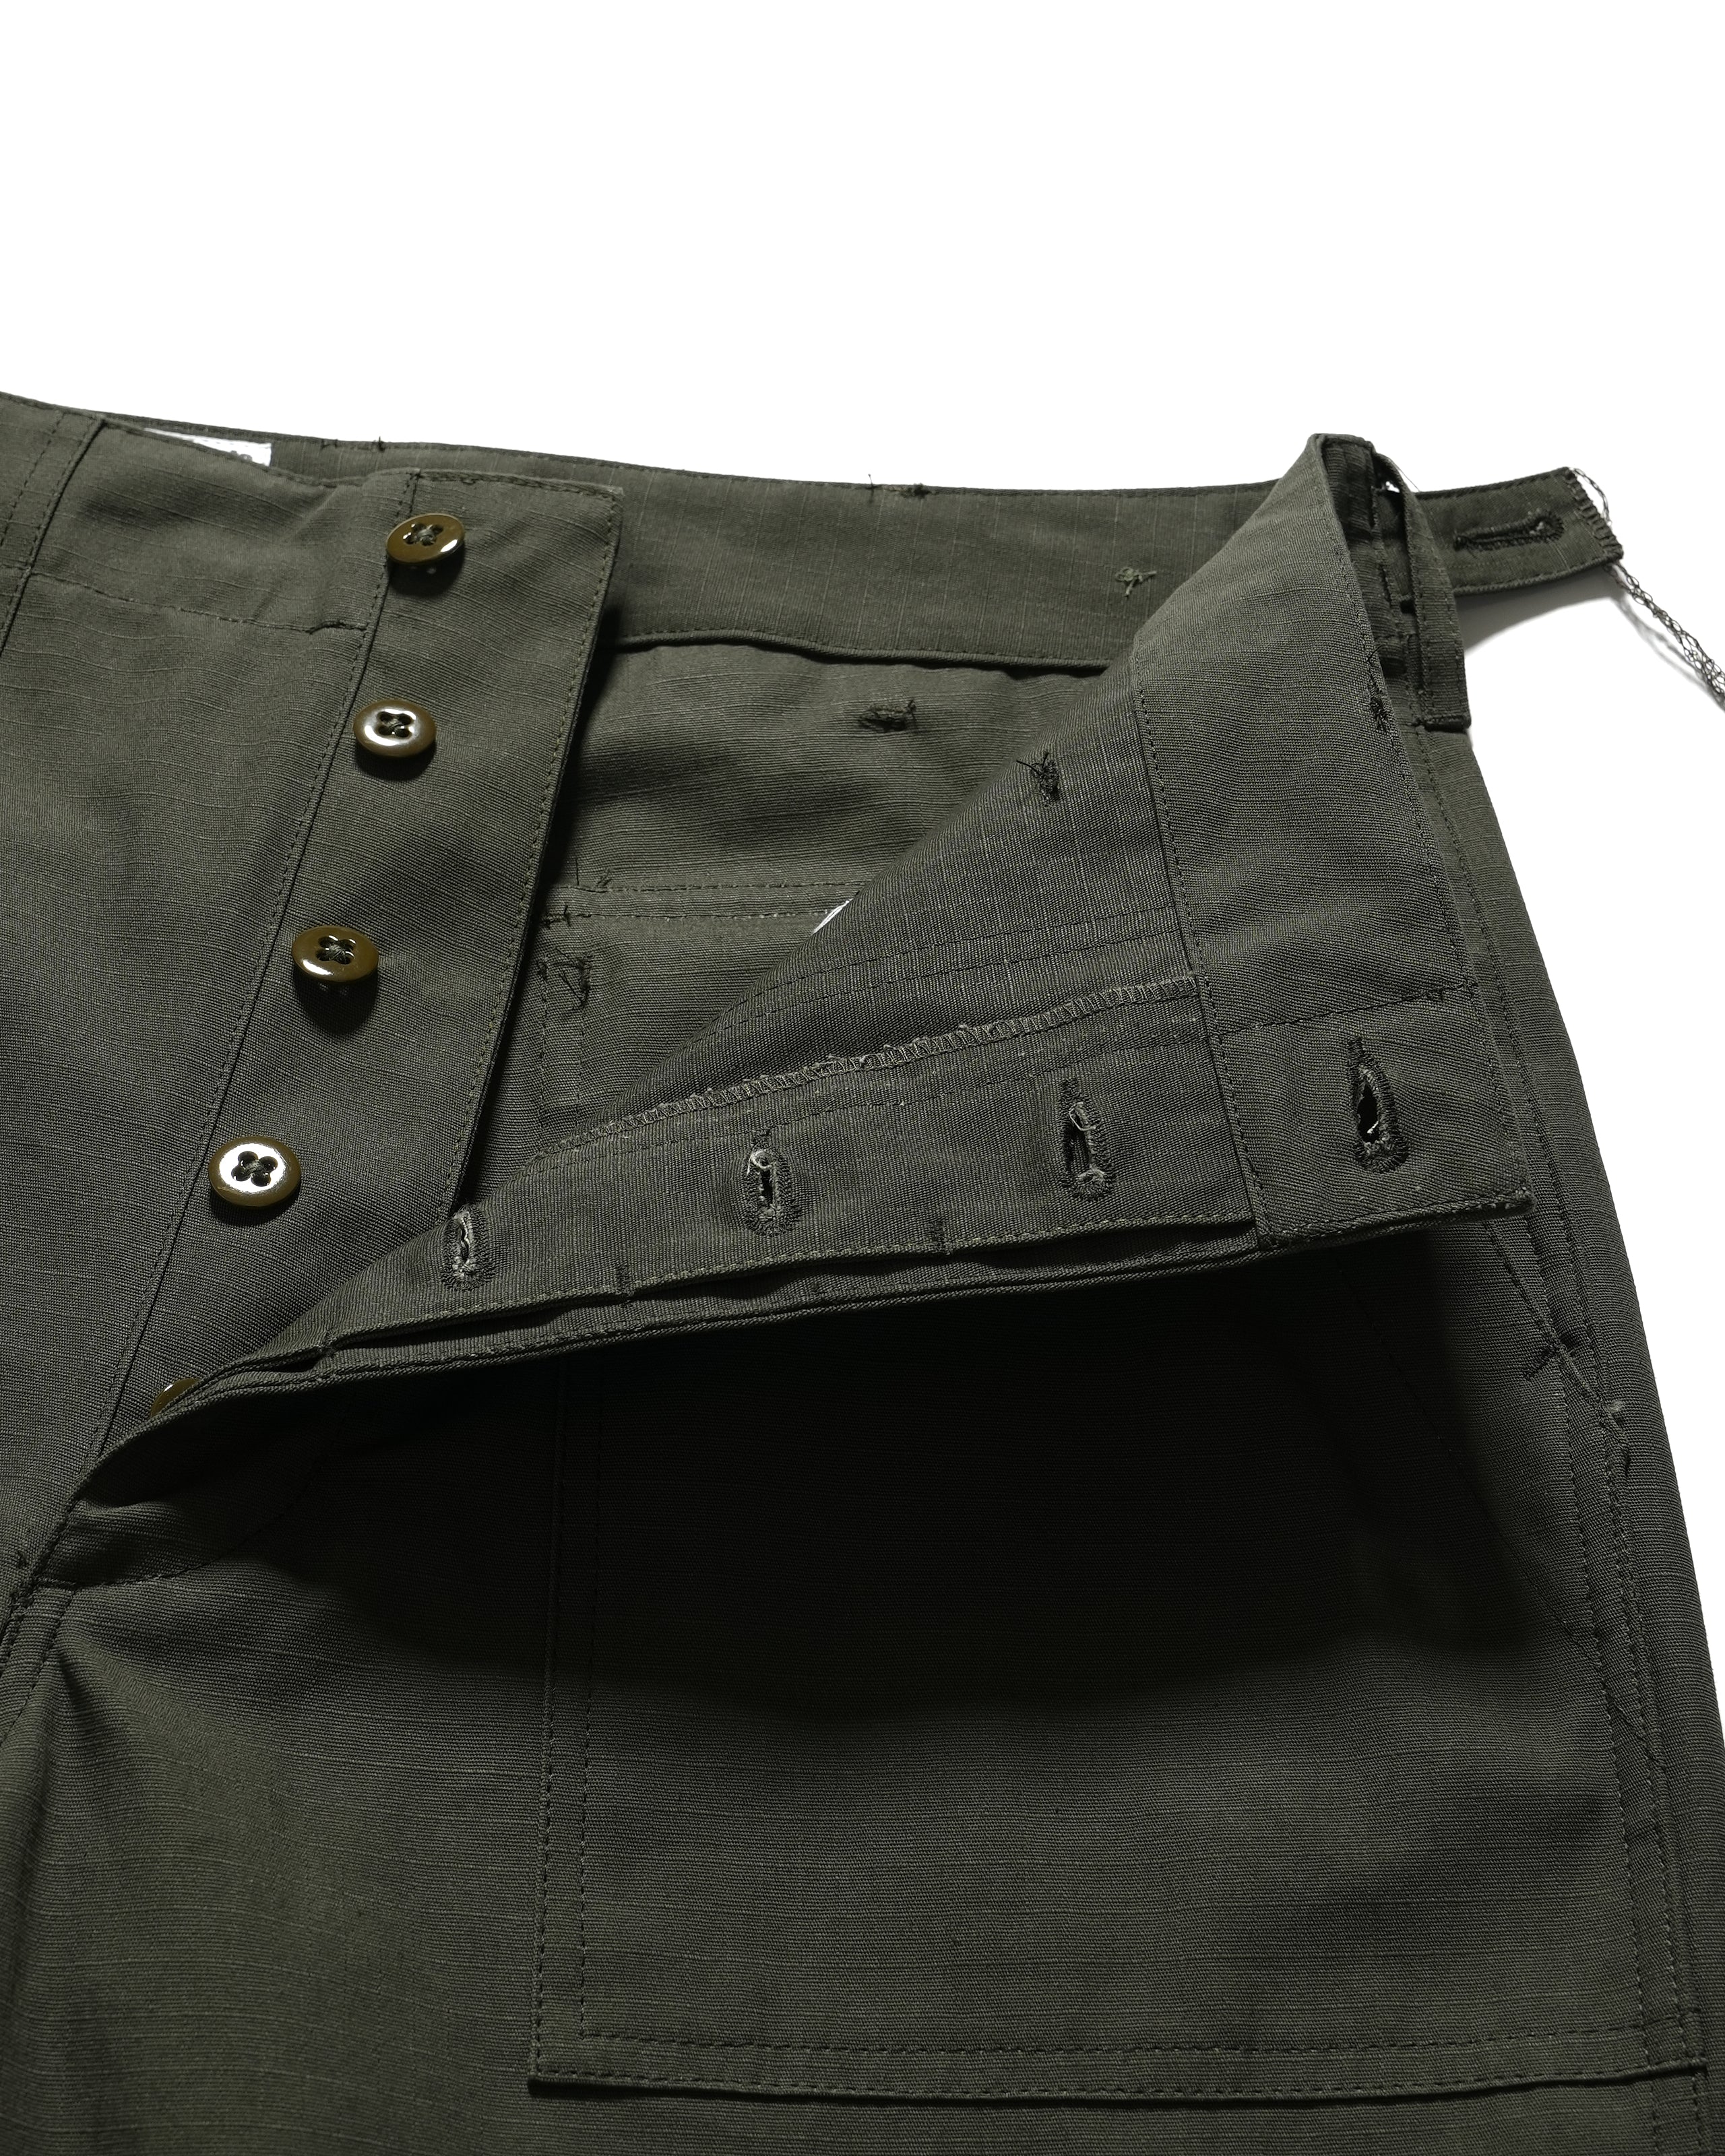 Fatigue Pant - Olive Heavyweight Cotton Ripstop